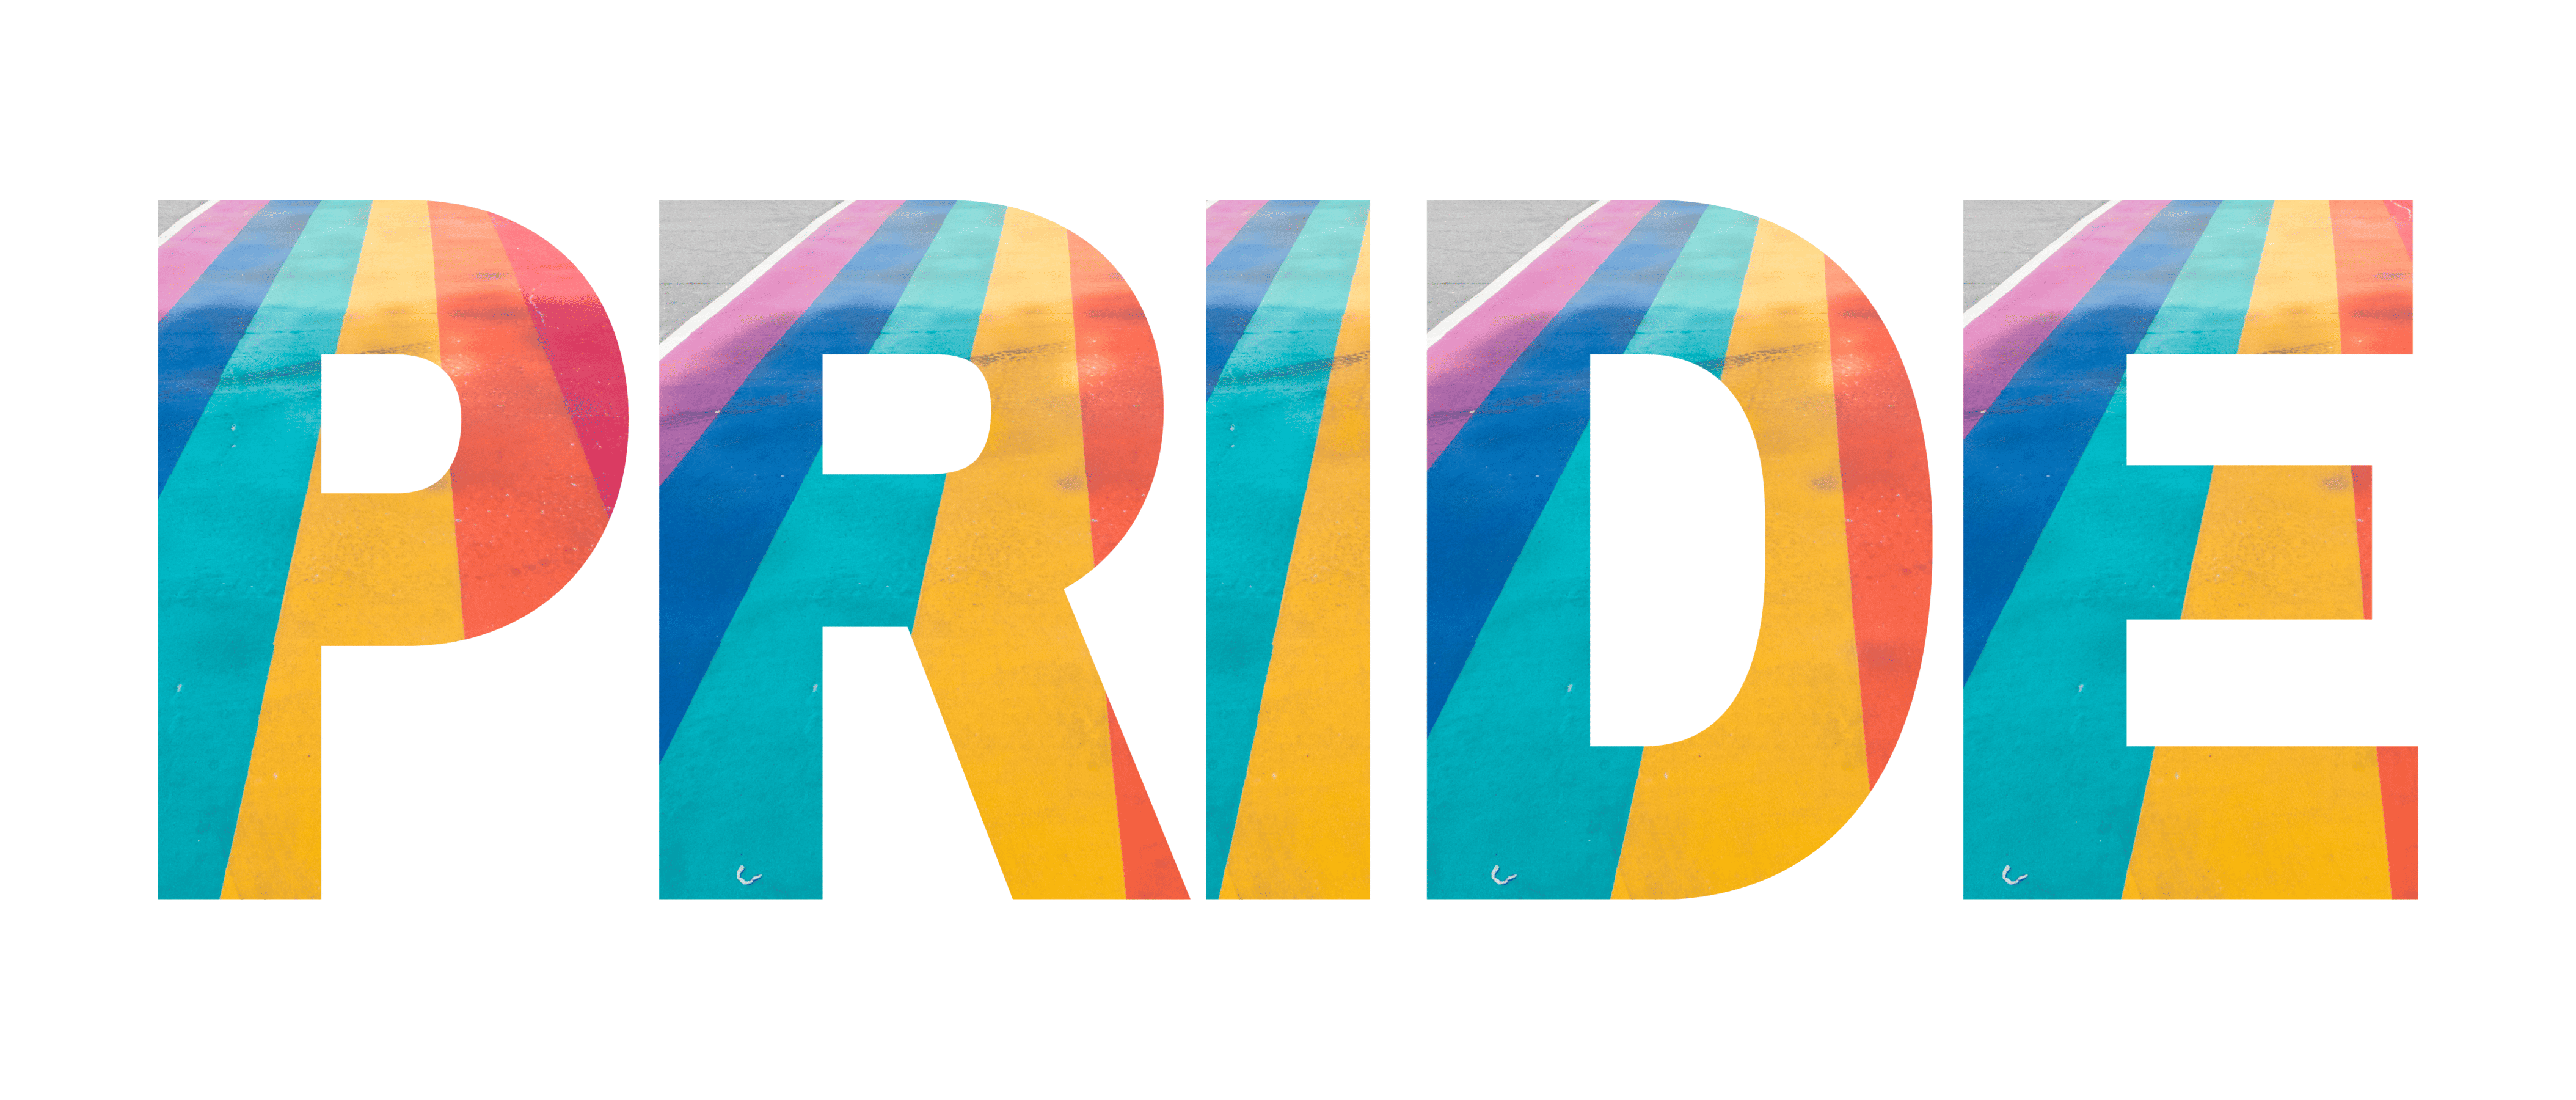 On a white background, text reads 'PRIDE'. The text is coloured grey, pink, navy, turquoise, yellow, orange and red.